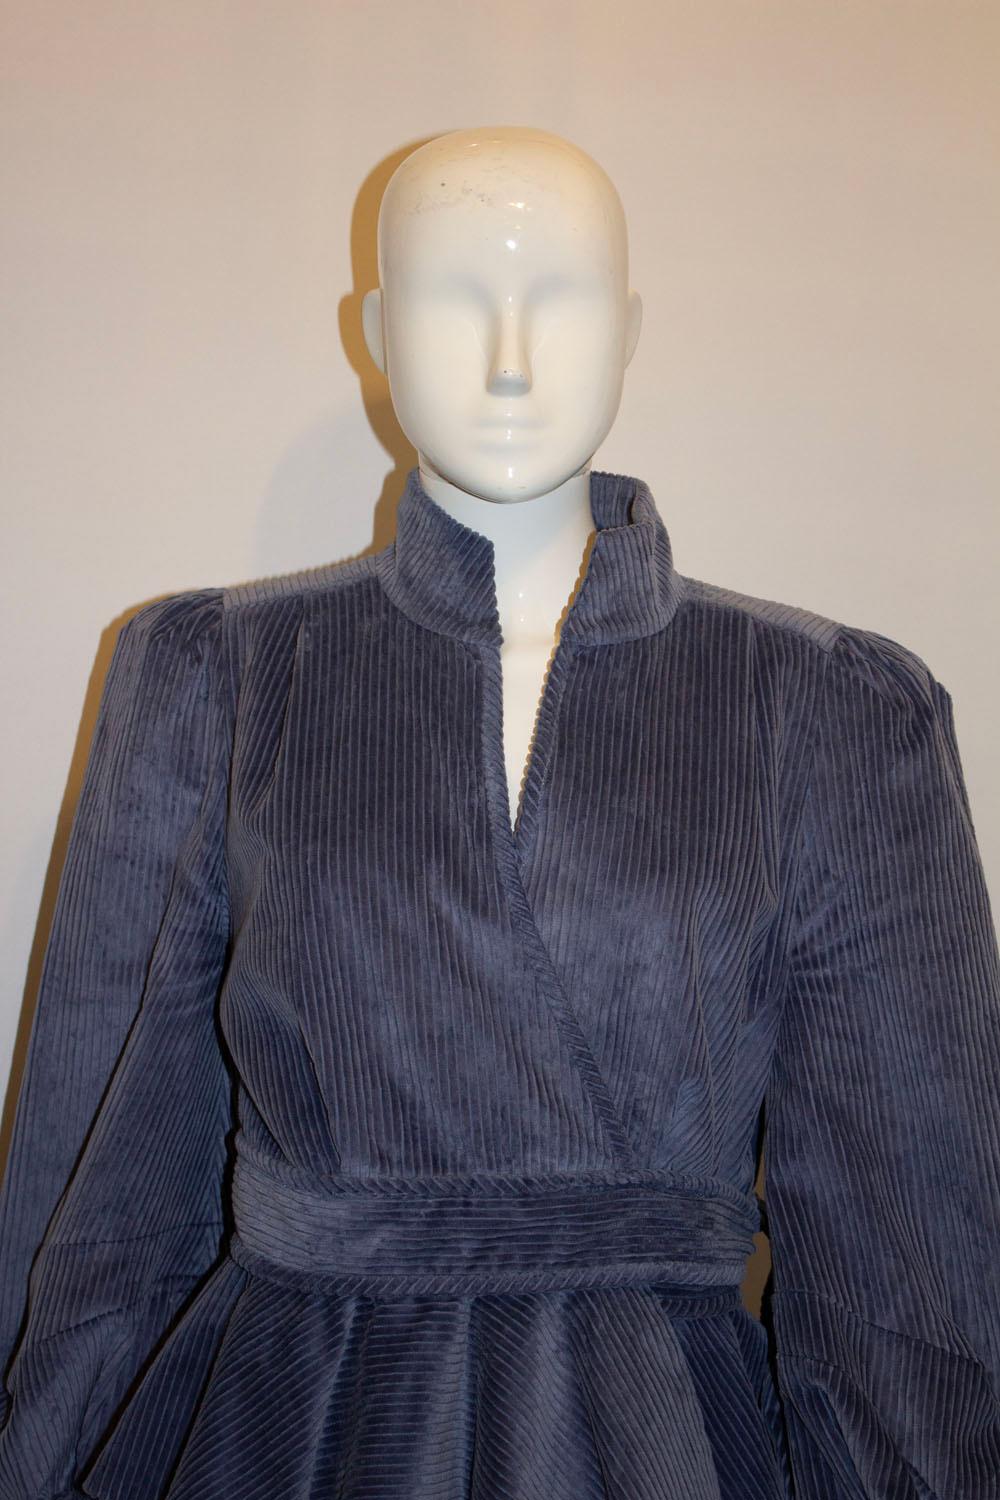 A wonderful jacket for Spring by leading British designer Anna Mason. The jacket is in a pretty blue/grey corduroy, and can be worn with the belt tied at the front or pulled through the loop and tied at the side. It has gathered sleaves, a stand up